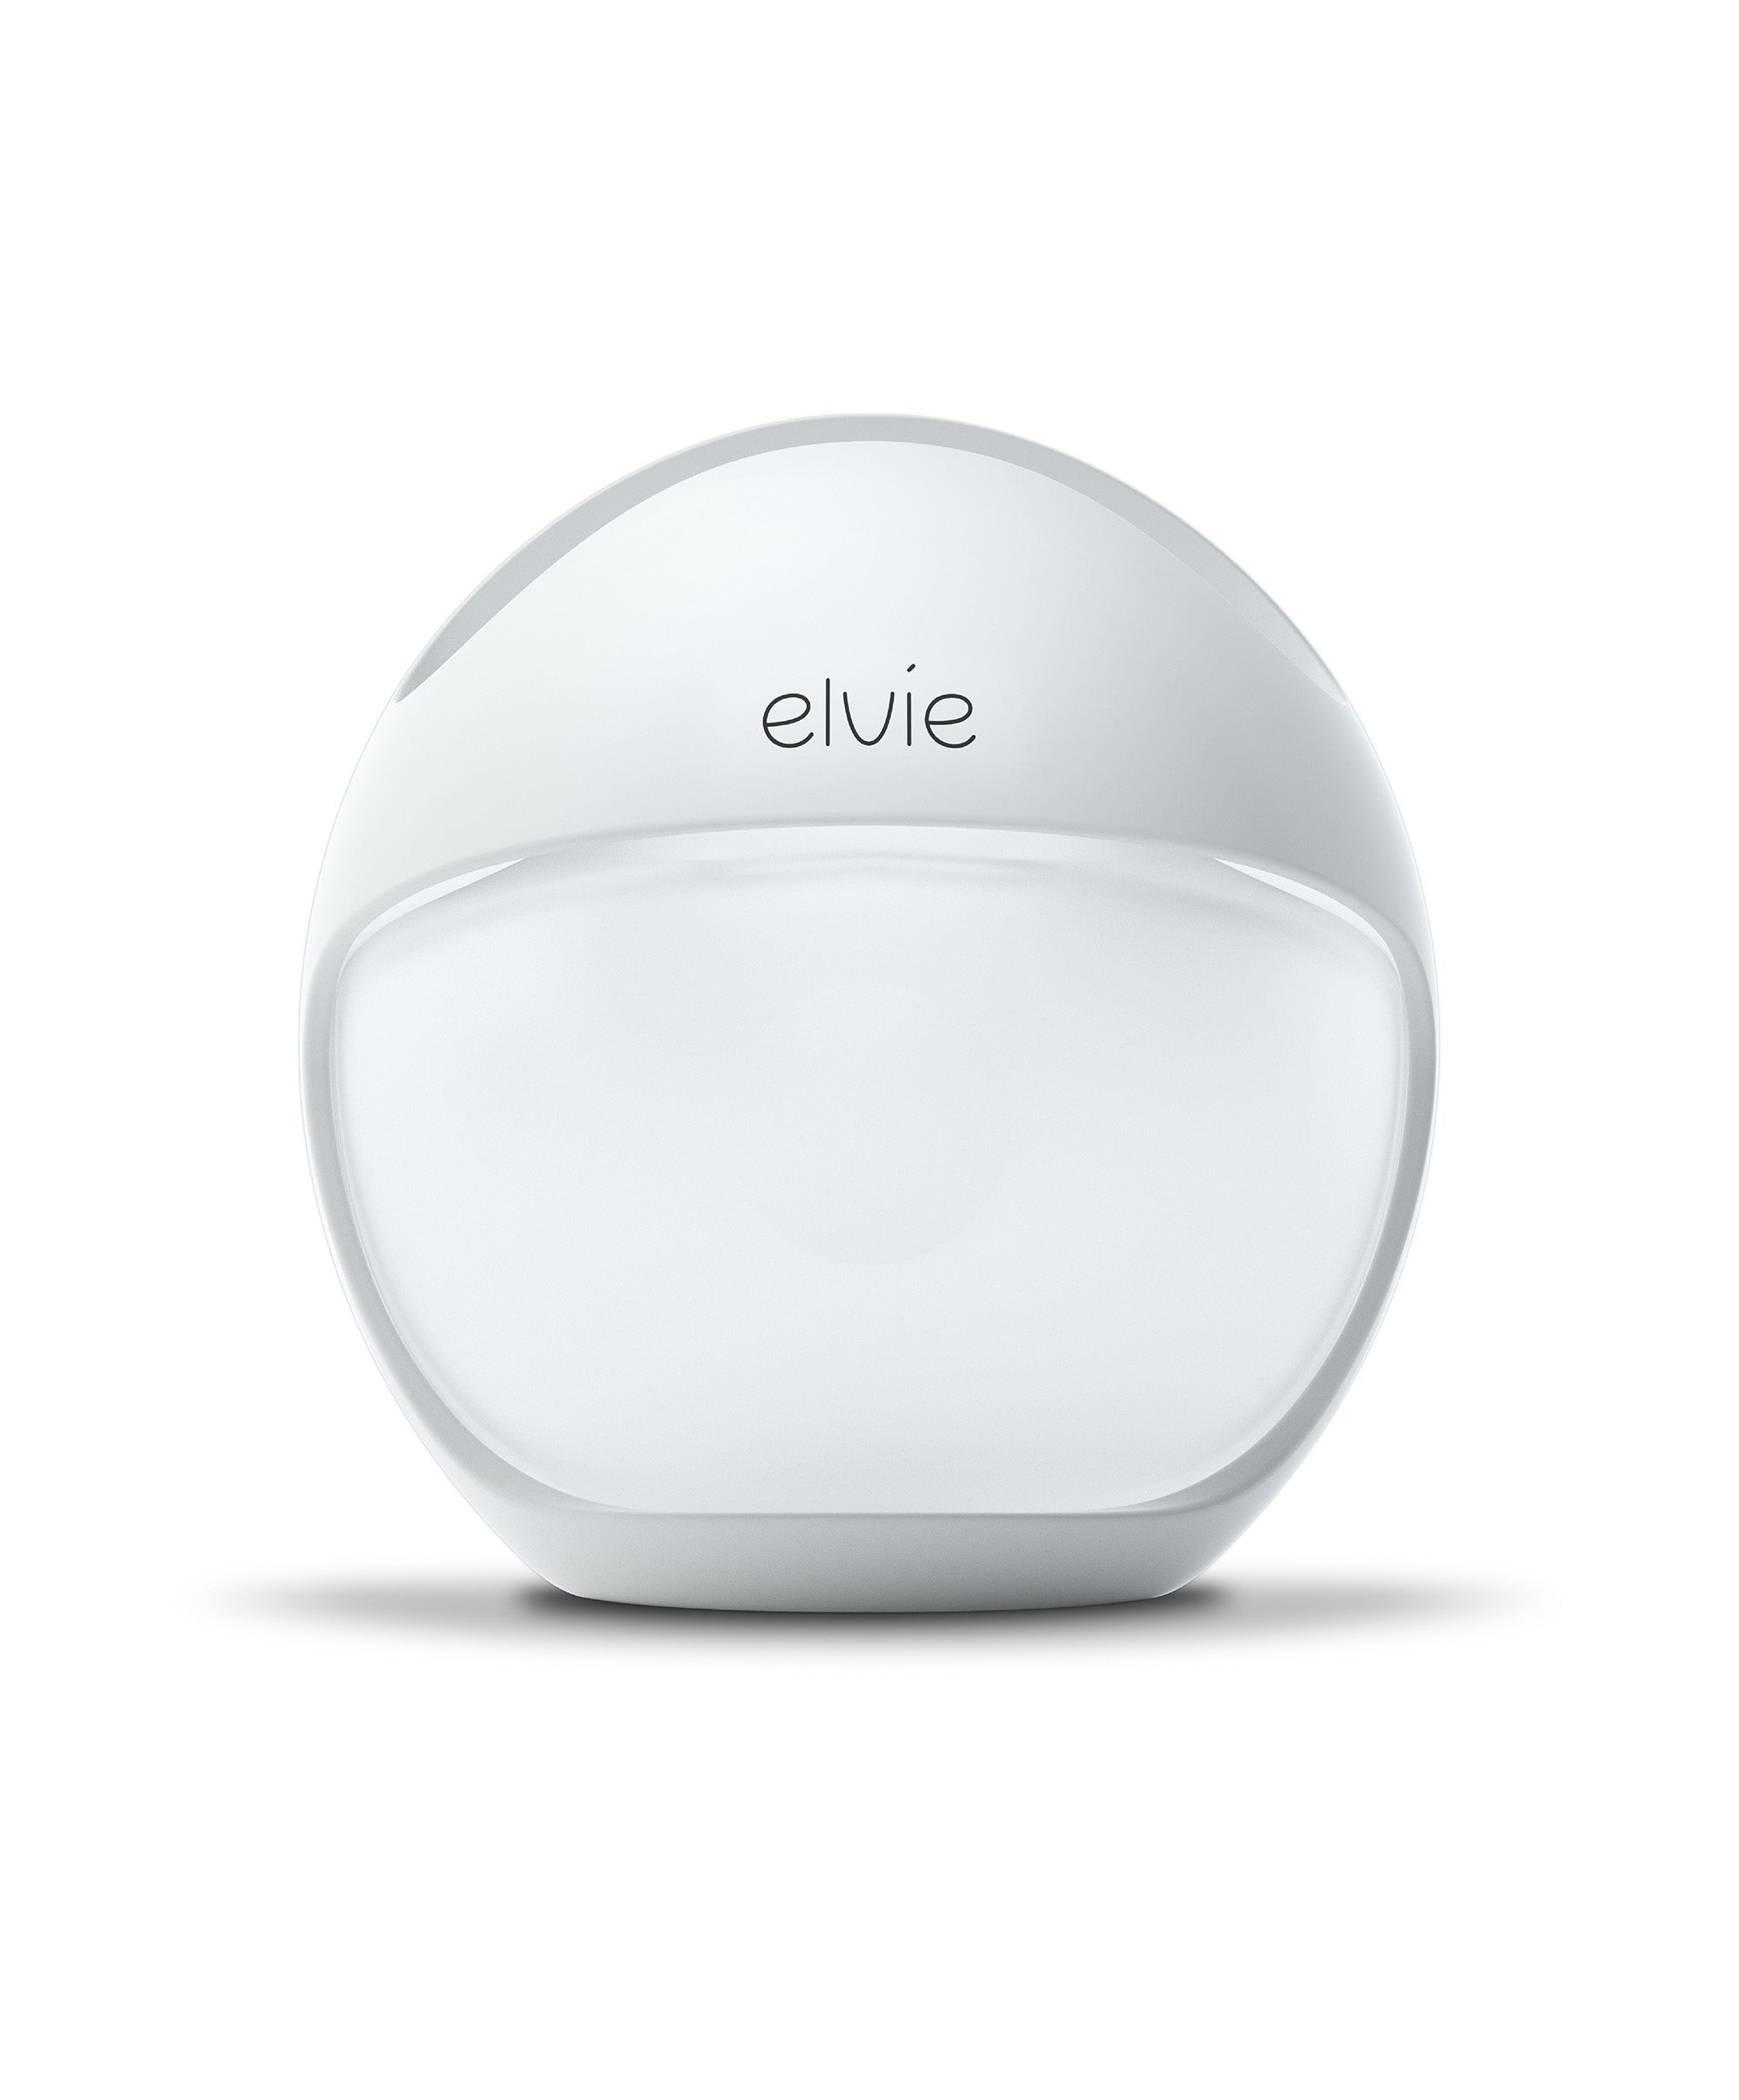 Elvie Electric breast pump - Brand New for sale in Co. Galway for €160 on  DoneDeal